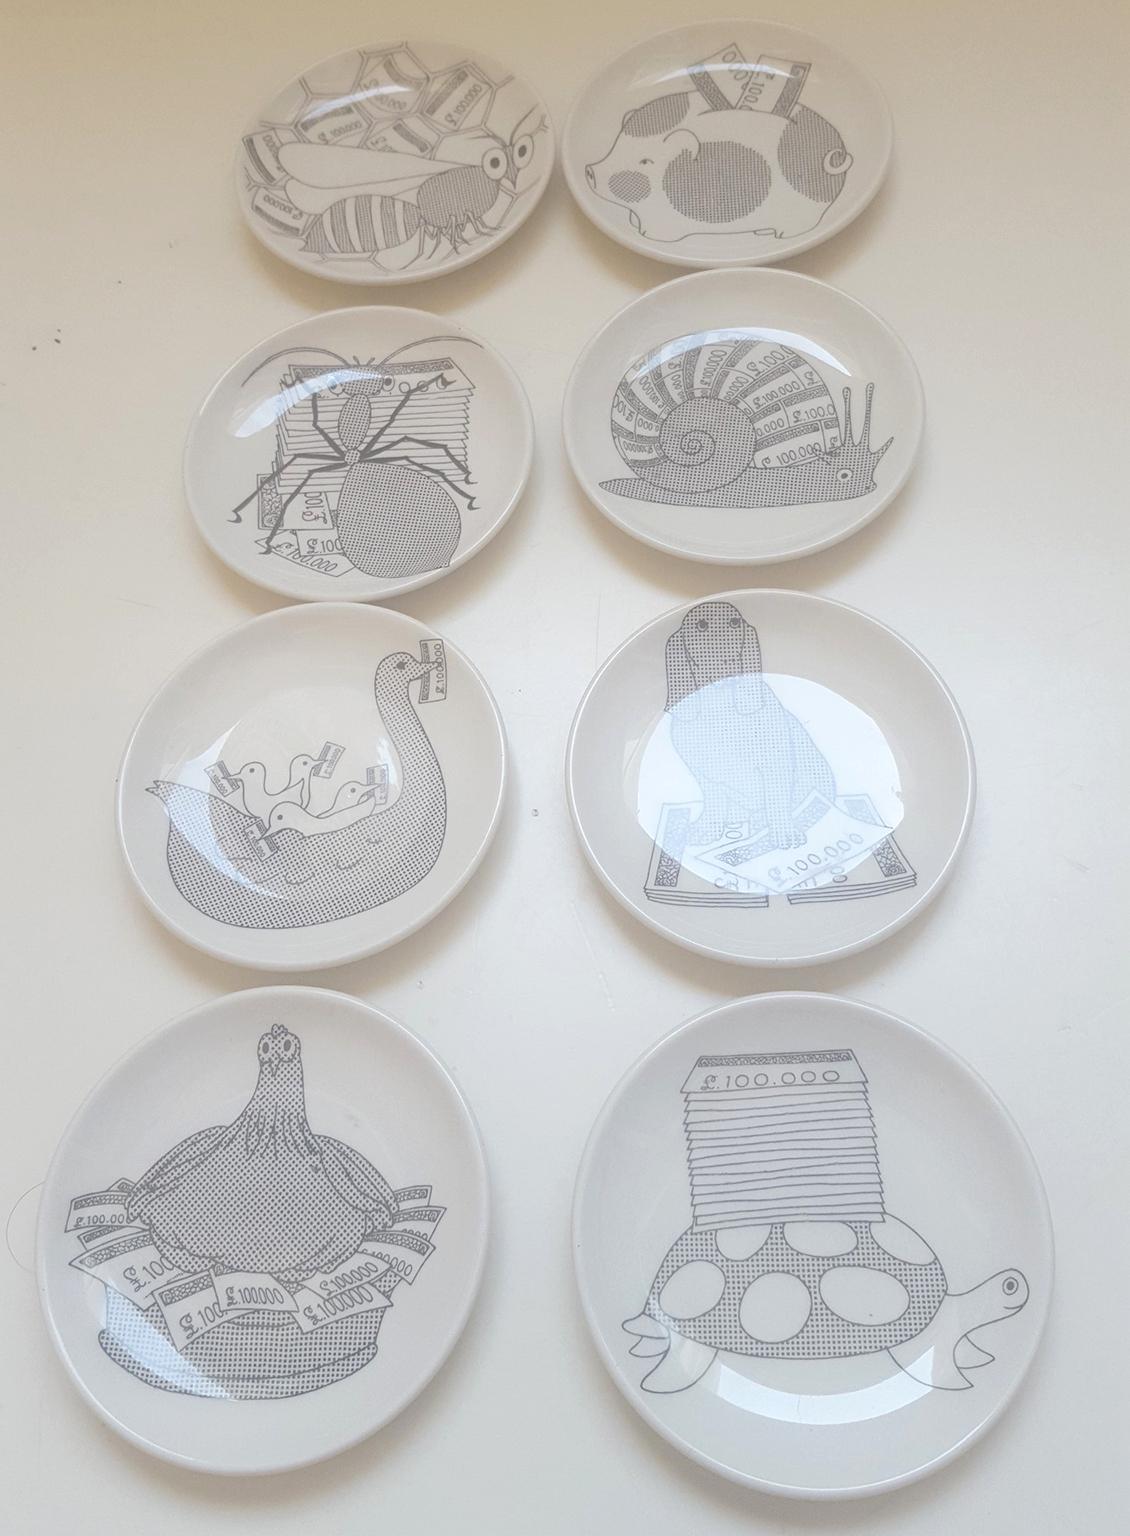 A set of eight coasters /small plates, in the original gold coloured box;
designs of animals with symbol of Lira Italiana.
White ceramic decirated with silk-screen printing.
Marked Fornasetti Milano with graphical symbol
Never used.